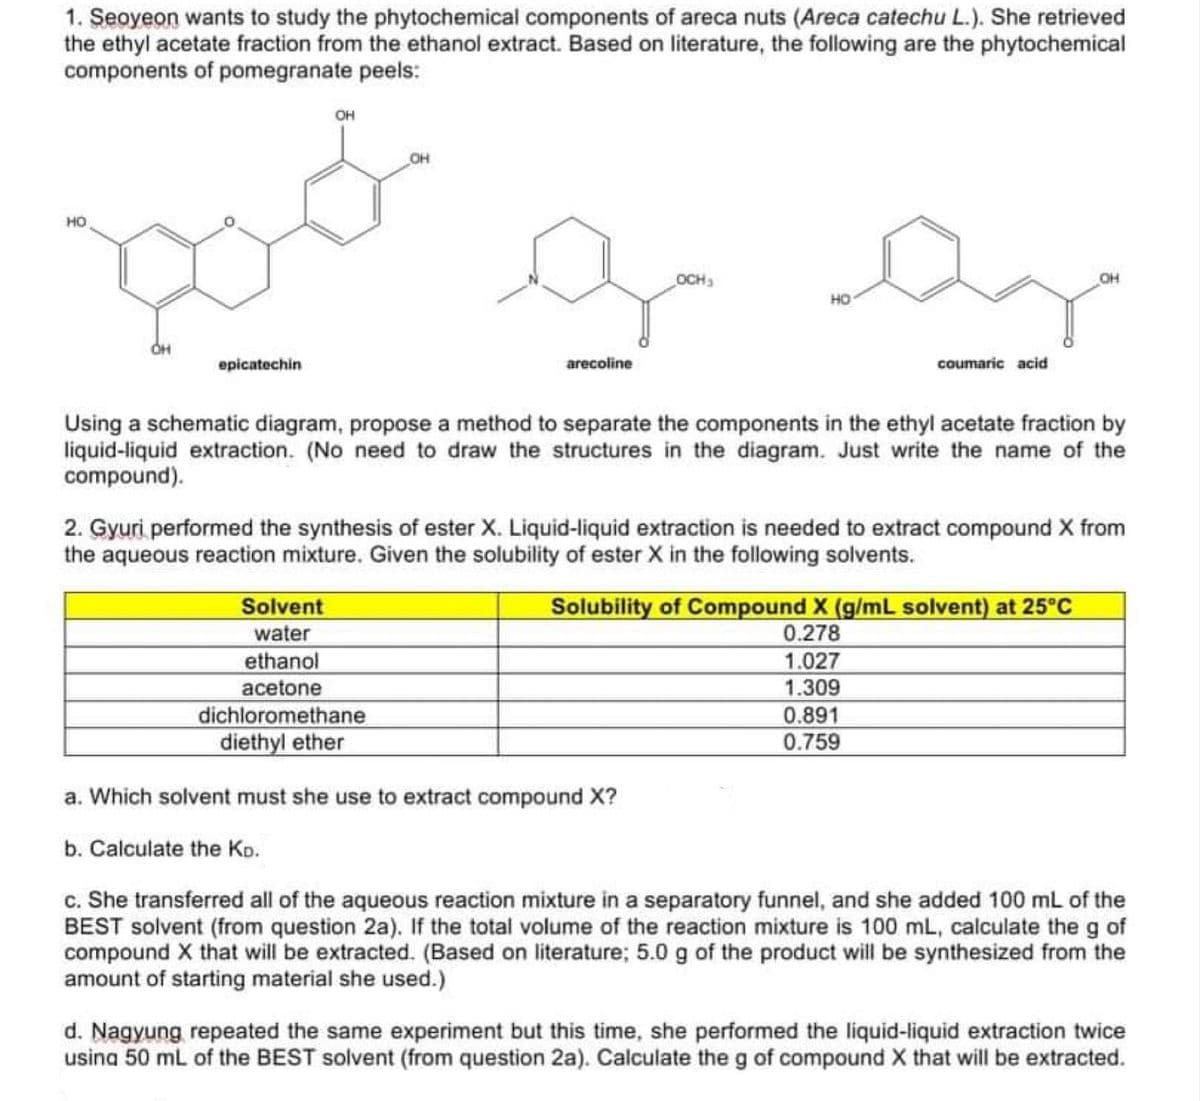 1. Seoyeon wants to study the phytochemical components of areca nuts (Areca catechu L.). She retrieved
the ethyl acetate fraction from the ethanol extract. Based on literature, the following are the phytochemical
components of pomegranate peels:
OH
OH
OCH
OH
HO
OH
epicatechin
arecoline
coumaric acid
Using a schematic diagram, propose a method to separate the components in the ethyl acetate fraction by
liquid-liquid extraction. (No need to draw the structures in the diagram. Just write the name of the
compound).
2. Gyuri performed the synthesis of ester X. Liquid-liquid extraction is needed to extract compound X from
the aqueous reaction mixture. Given the solubility of ester X in the following solvents.
Solvent
water
ethanol
acetone
dichloromethane
diethyl ether
Solubility of Compound X (g/mL solvent) at 25°c
0.278
1.027
1.309
0.891
0.759
a. Which solvent must she use to extract compound X?
b. Calculate the KD.
c. She transferred all of the aqueous reaction mixture in a separatory funnel, and she added 100 mL of the
BEST solvent (from question 2a). If the total volume of the reaction mixture is 100 mL, calculate the g of
compound X that will be extracted. (Based on literature; 5.0 g of the product will be synthesized from the
amount of starting material she used.)
d. Nagyung repeated the same experiment but this time, she performed the liquid-liquid extraction twice
usina 50 ml of the BEST solvent (from question 2a). Calculate the g of compound X that will be extracted.
